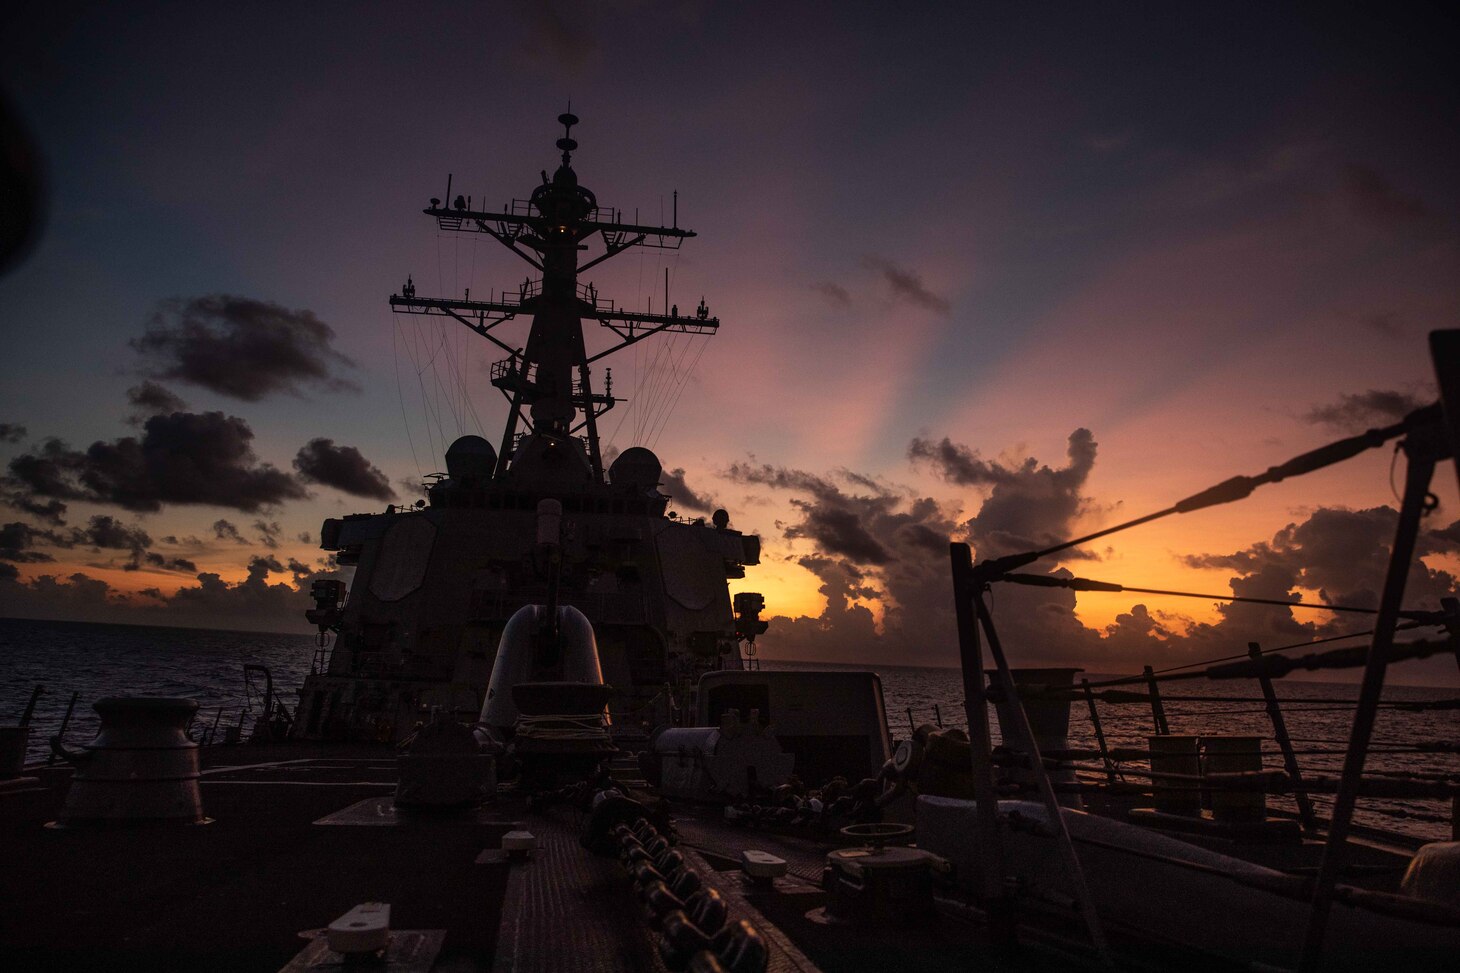 SOUTH CHINA SEA (May 20, 2021) –The Arleigh Burke-class guided-missile destroyer USS Curtis Wilbur (DDG 54) conducts routine operations in the South China Sea. Curtis Wilbur is assigned to Commander, Task Force 71/Destroyer Squadron (DESRON) 15, the Navy’s largest forward DESRON and the U.S. 7th Fleet’s principal surface force.